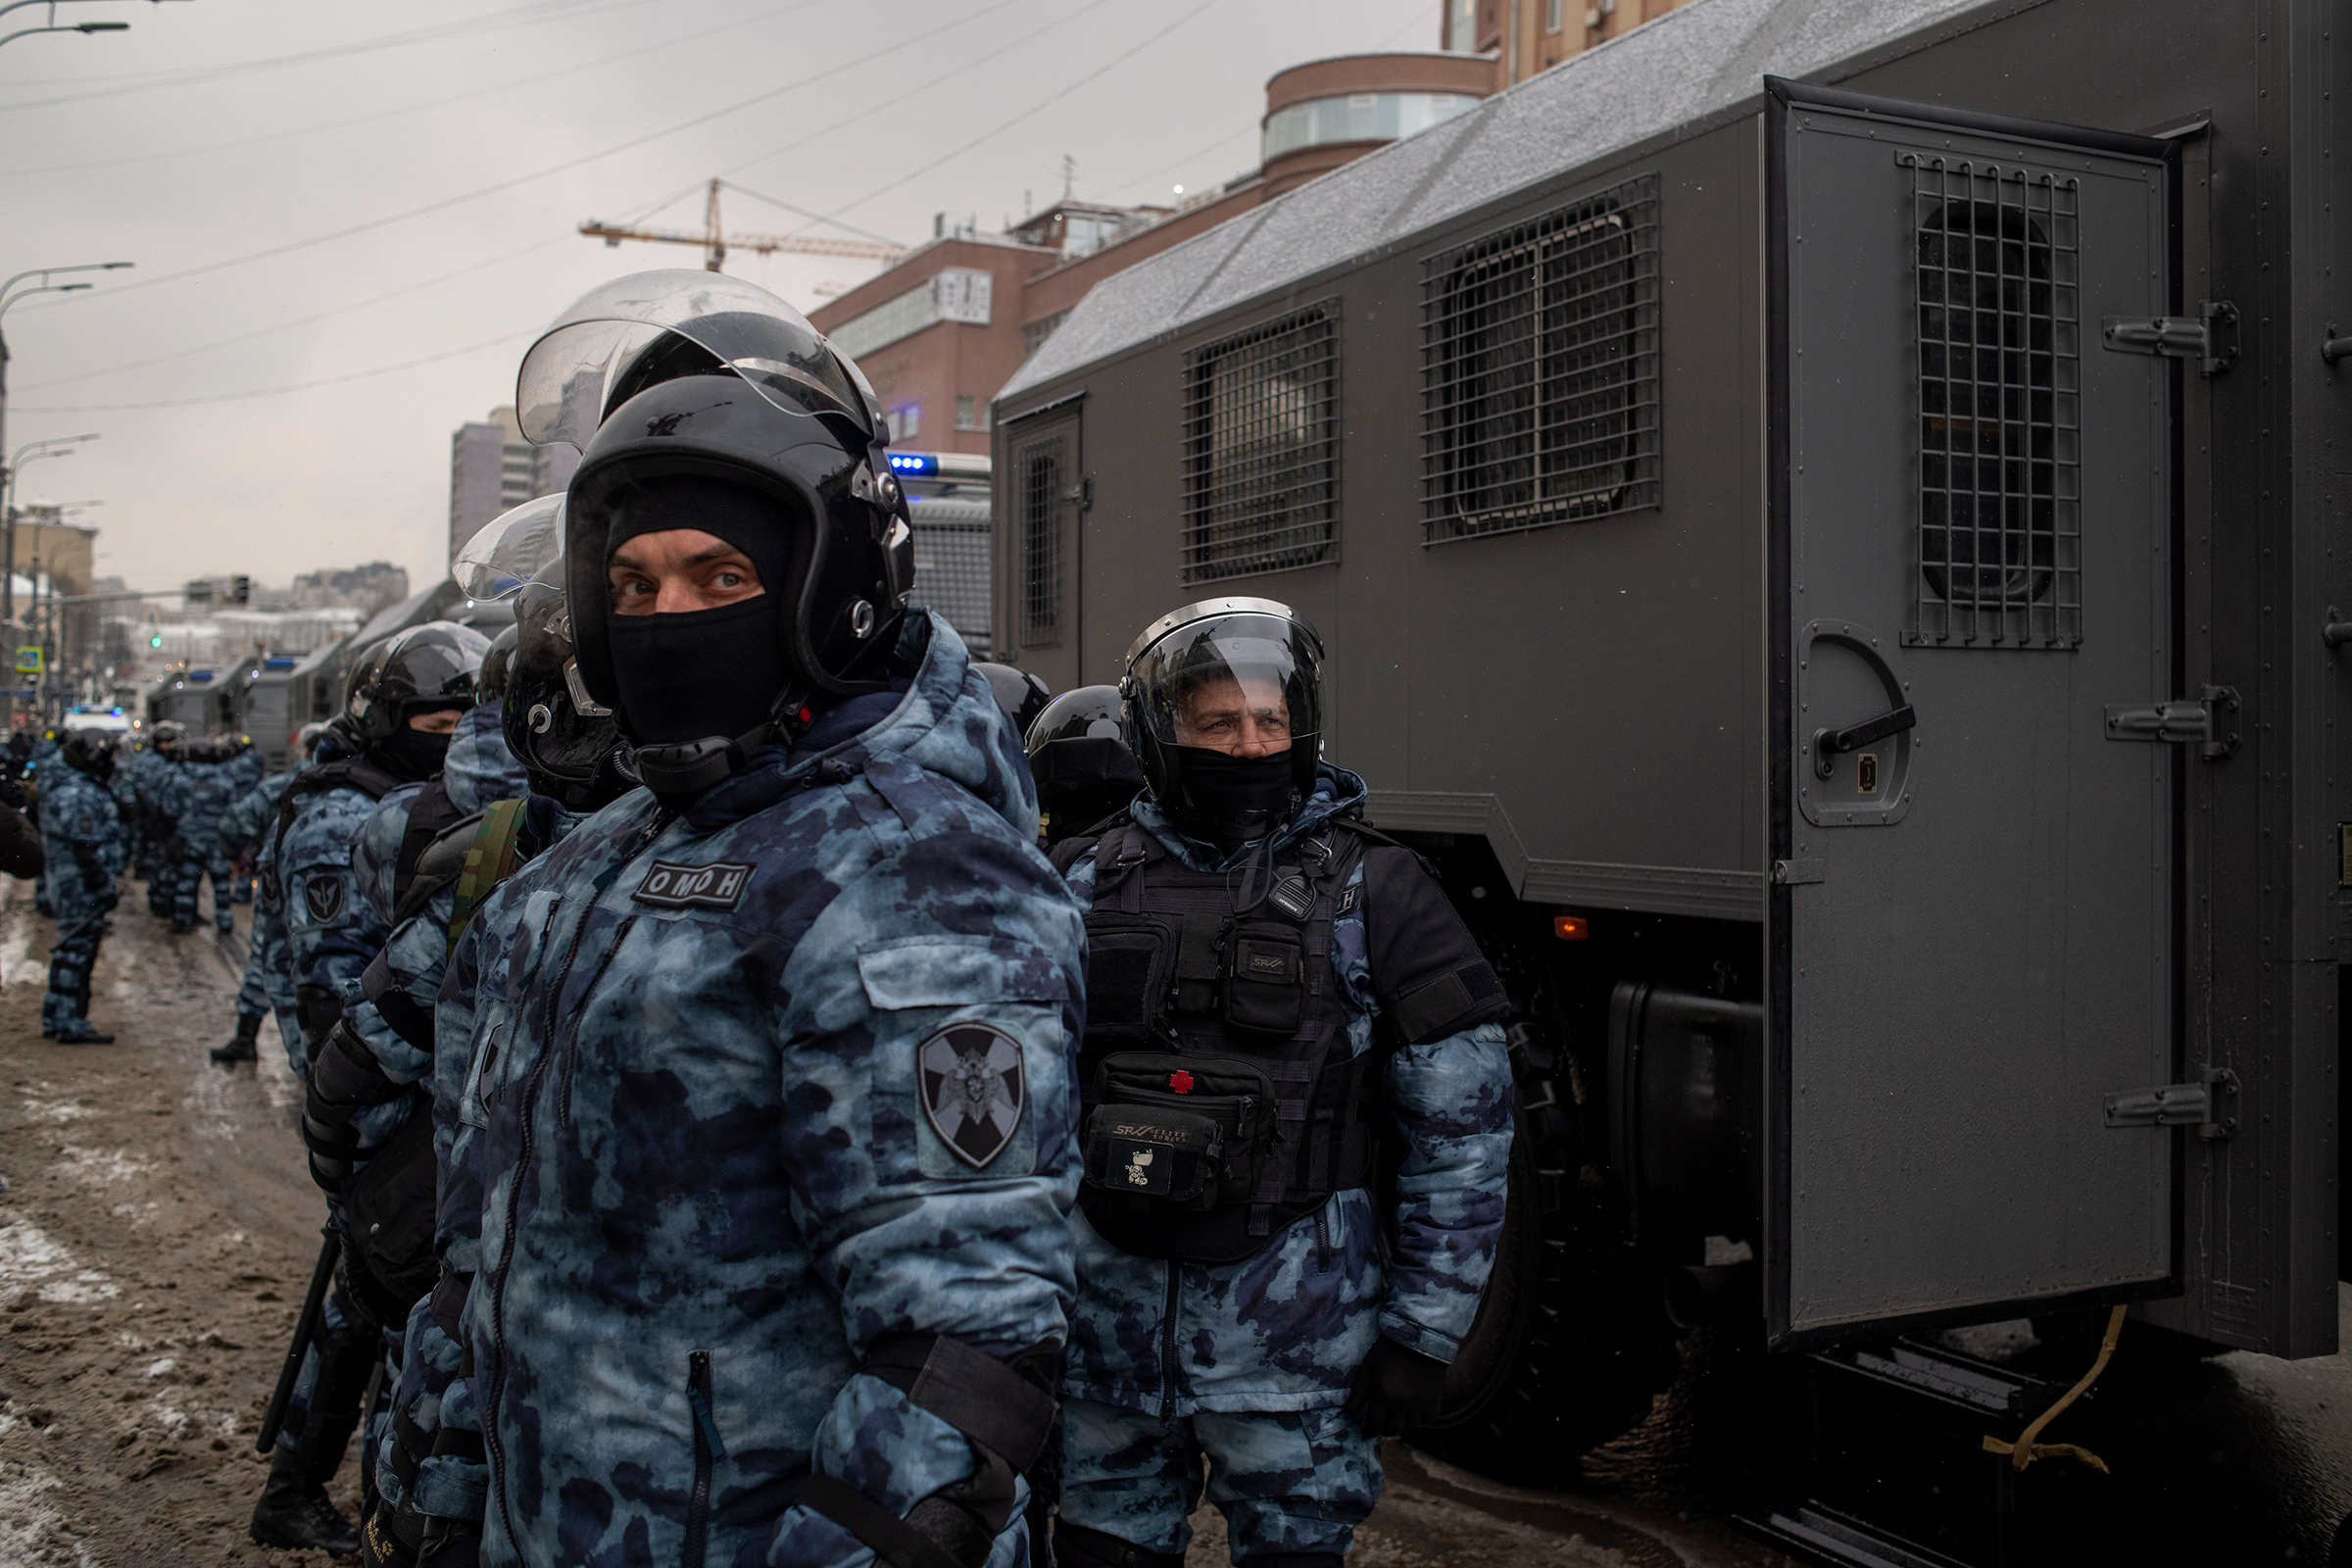 Protests swelled across Russia on Jan. 31, marking a second consecutive weekend in the wake of Alexei Navalny's arrest.